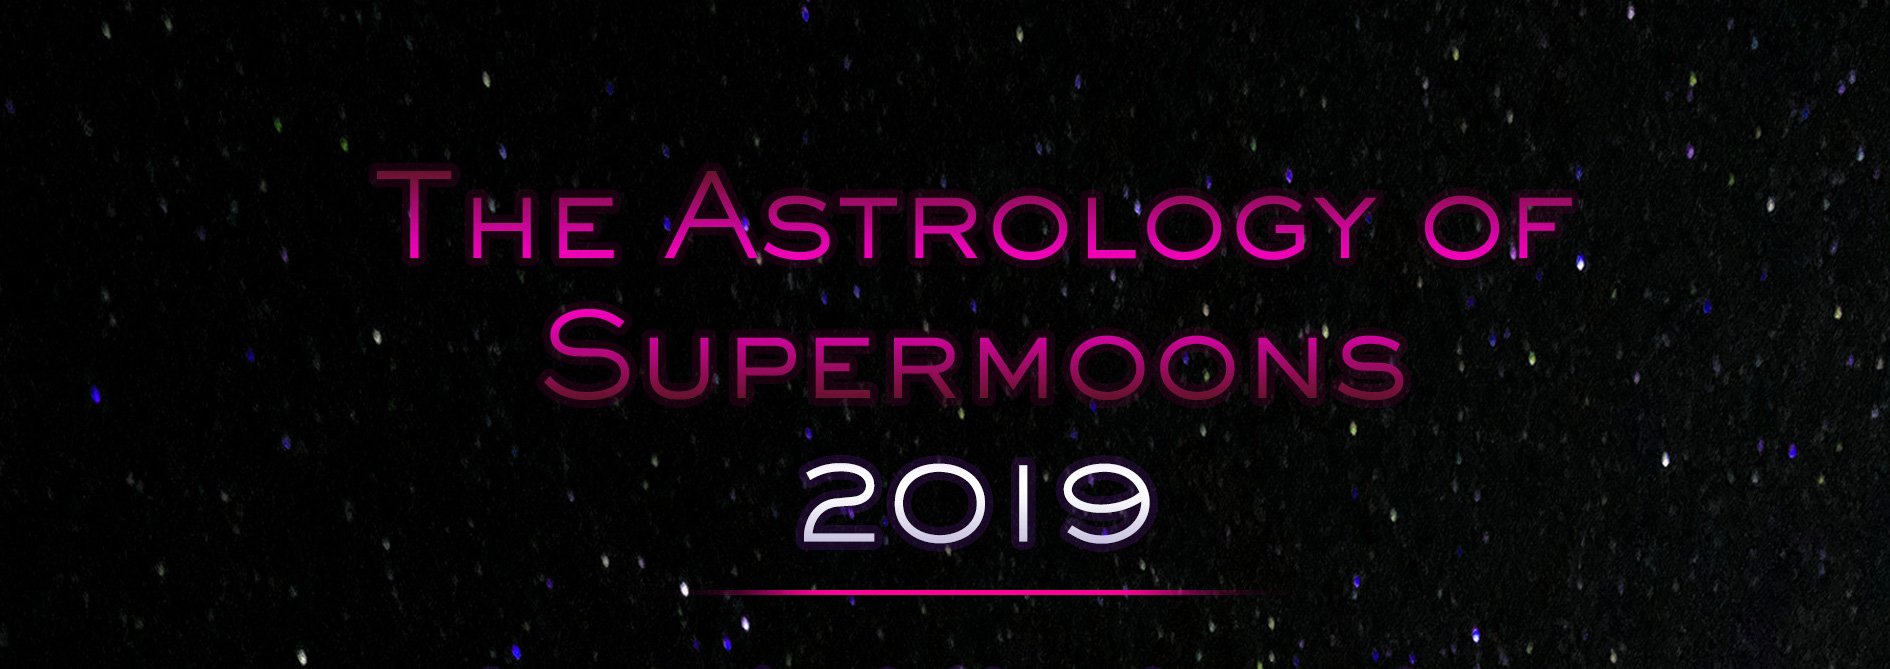 Excerpt of "The Astrology of Supermoons 2019" Infographic. Created by The Signal reporter Lexi Riley.